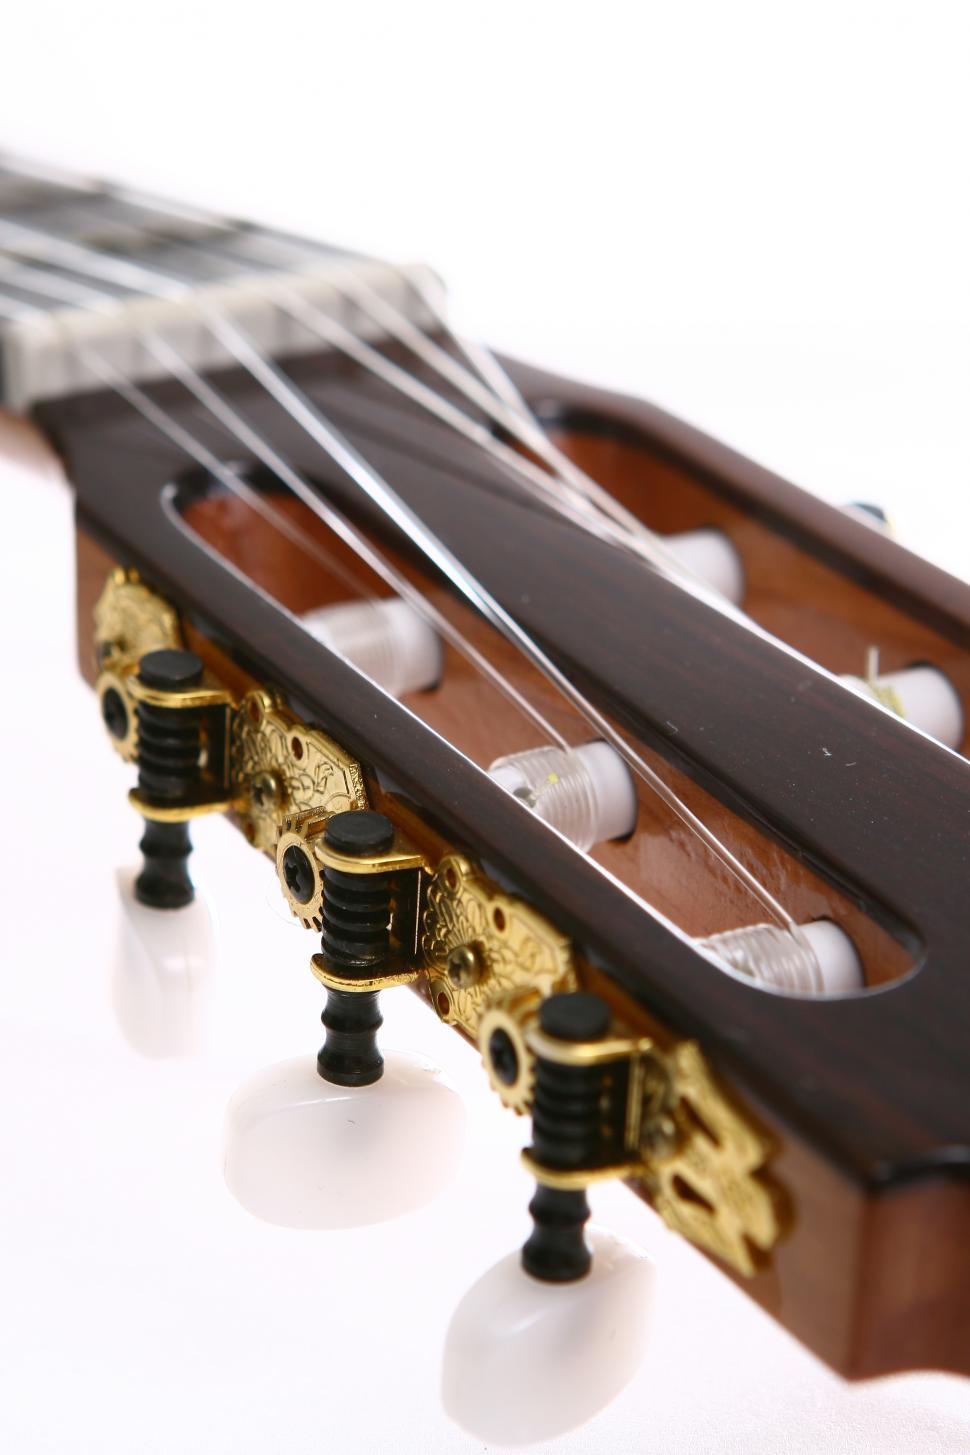 Free Image of Acoustic guitar head and tuners 